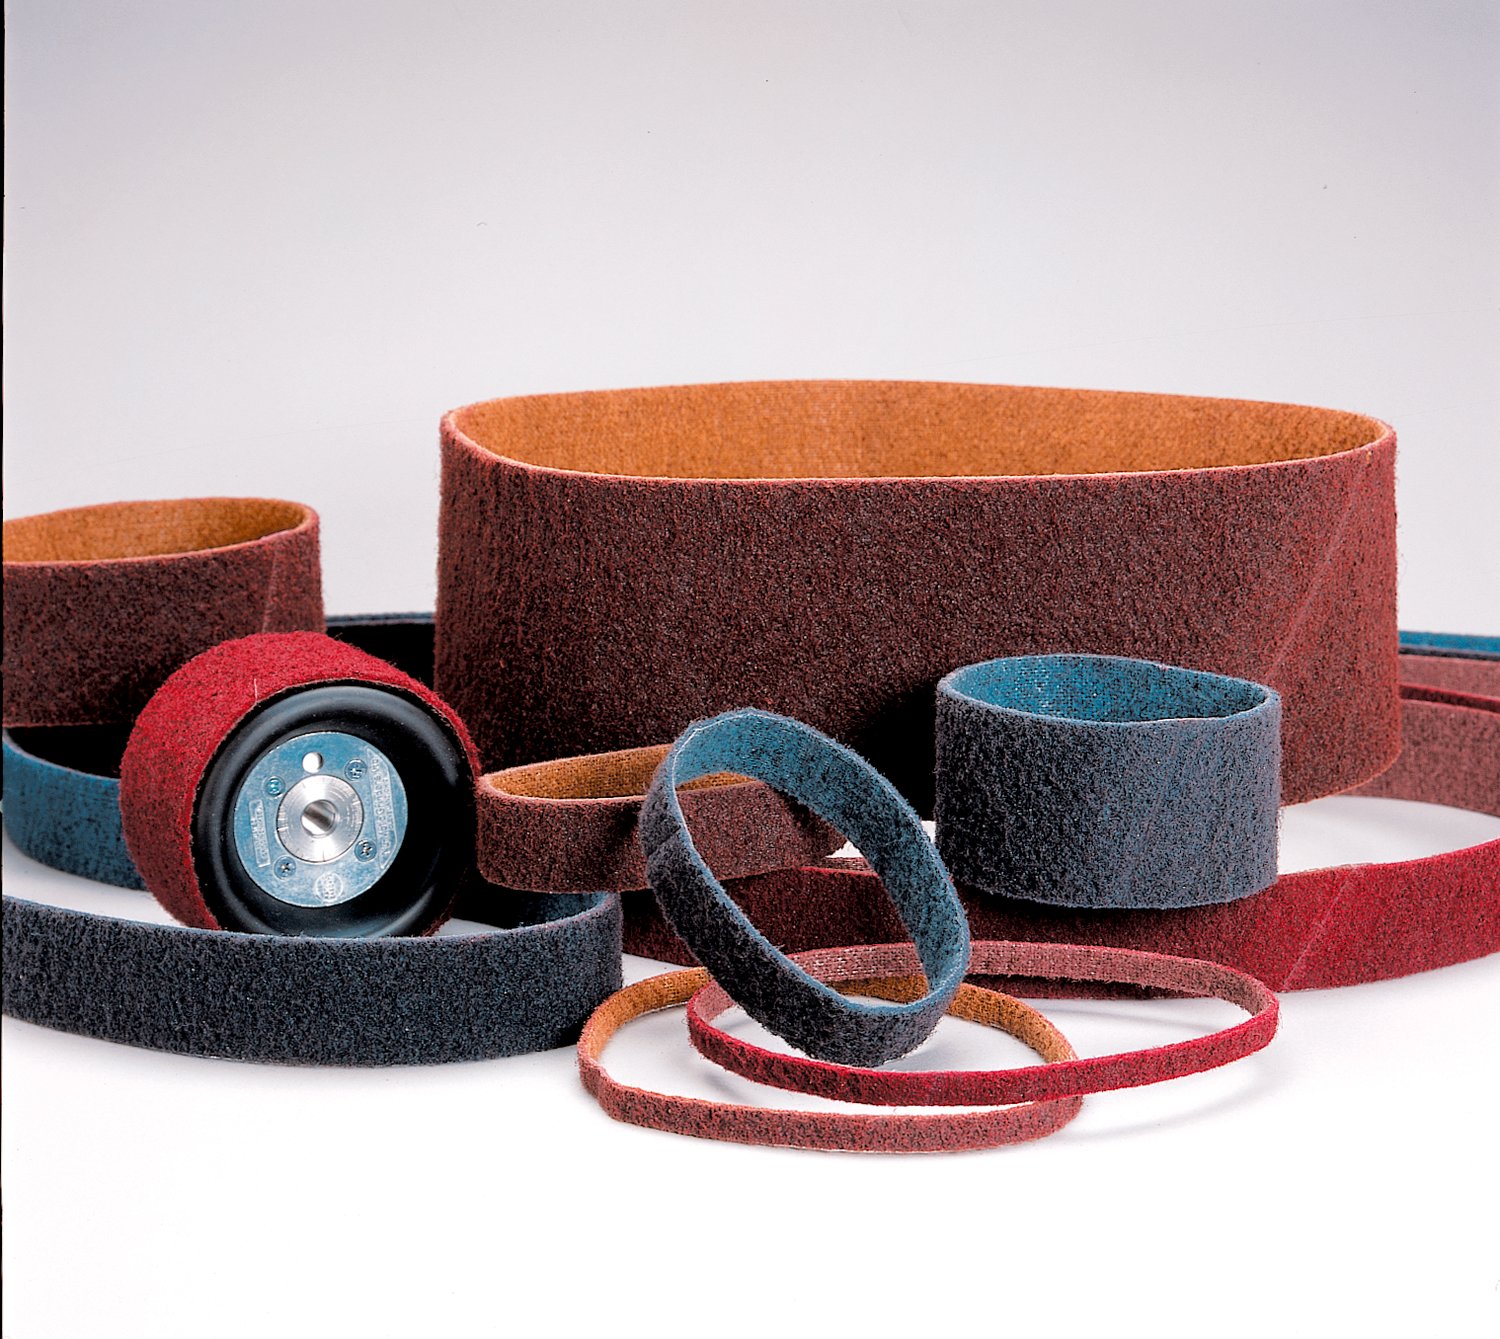 7010368562 - Standard Abrasives Surface Conditioning RC Belt 888213, 4 in x 60 in
VFN, 5 ea/Case